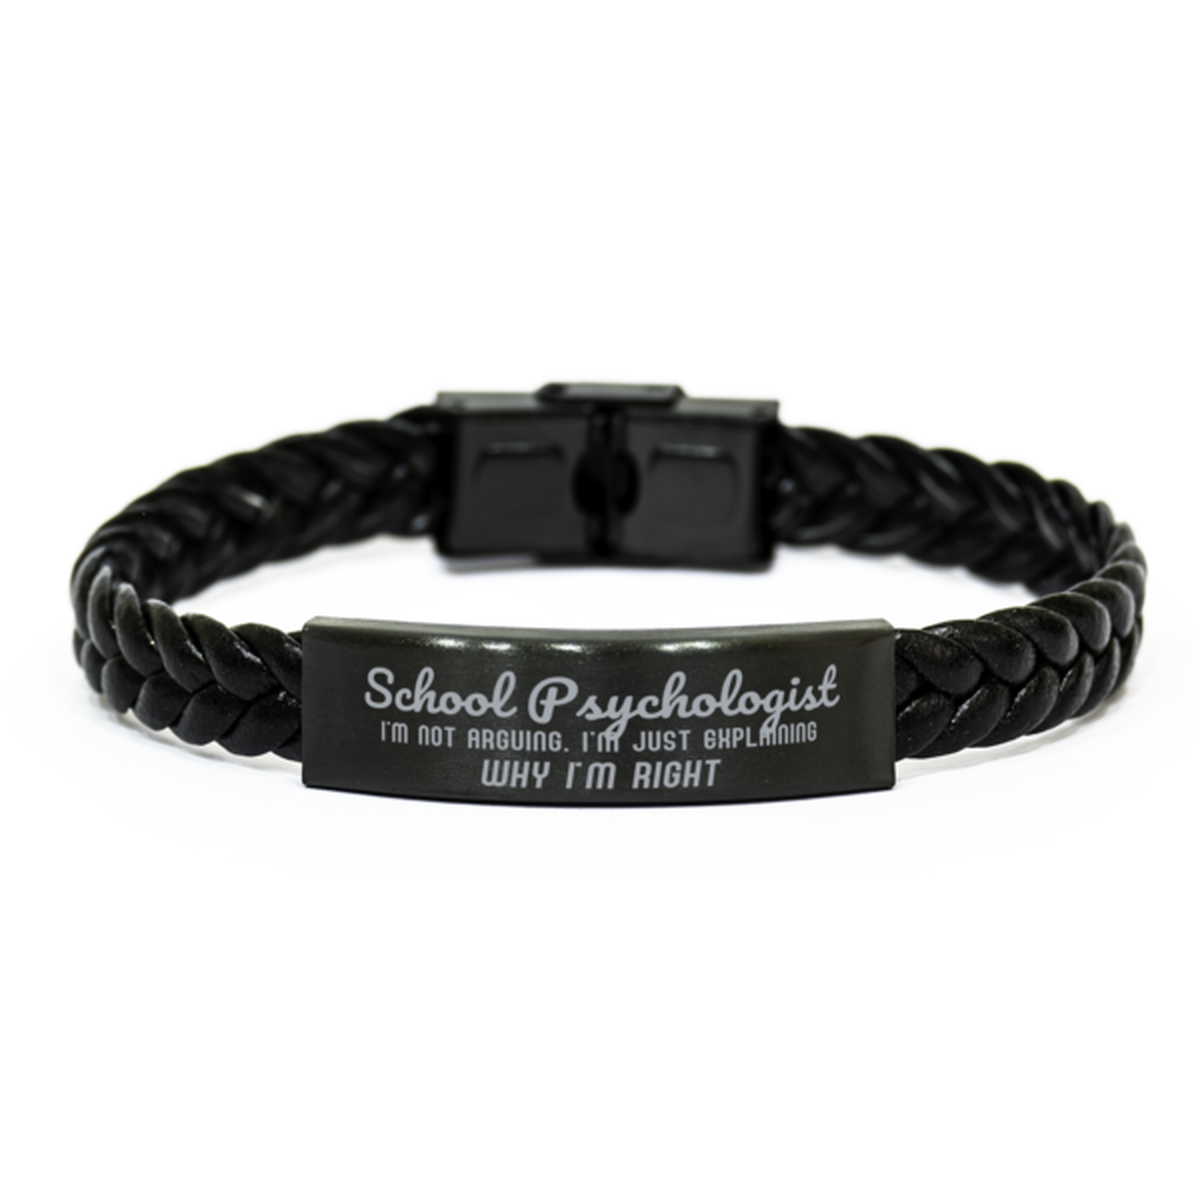 School Psychologist I'm not Arguing. I'm Just Explaining Why I'm RIGHT Braided Leather Bracelet, Graduation Birthday Christmas School Psychologist Gifts For School Psychologist Funny Saying Quote Present for Men Women Coworker